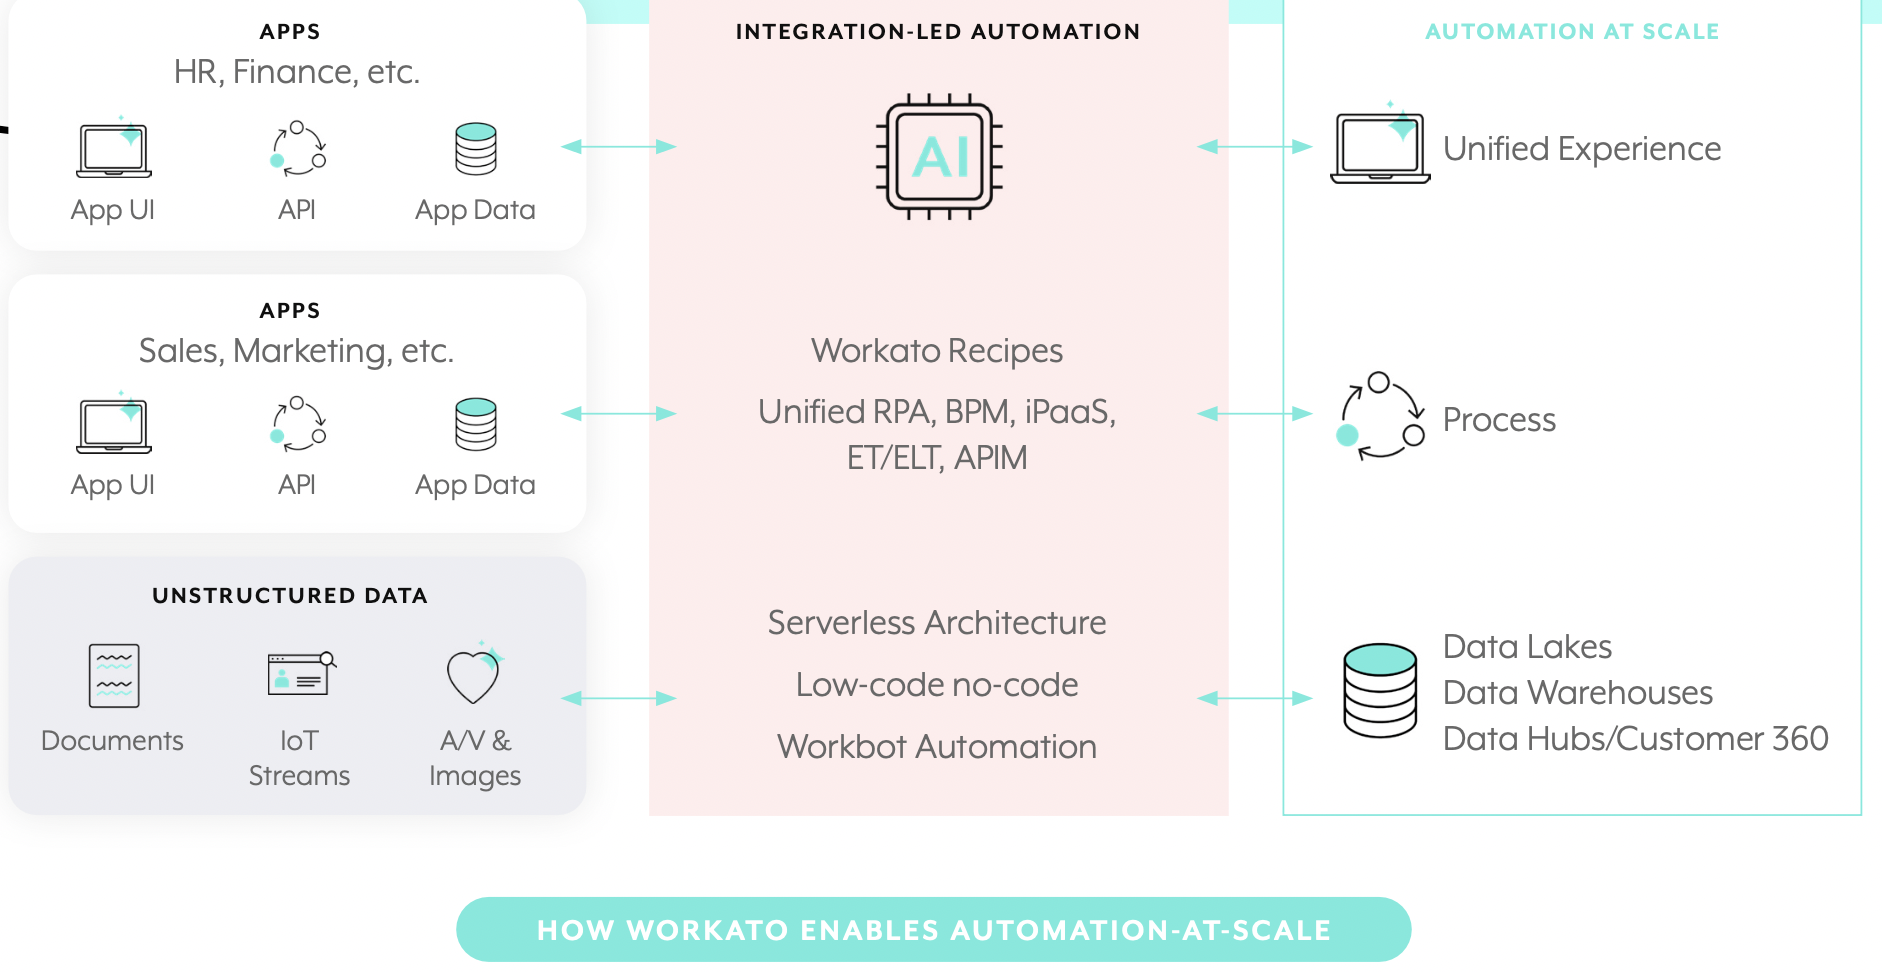 How Workato enables automation-at-scale